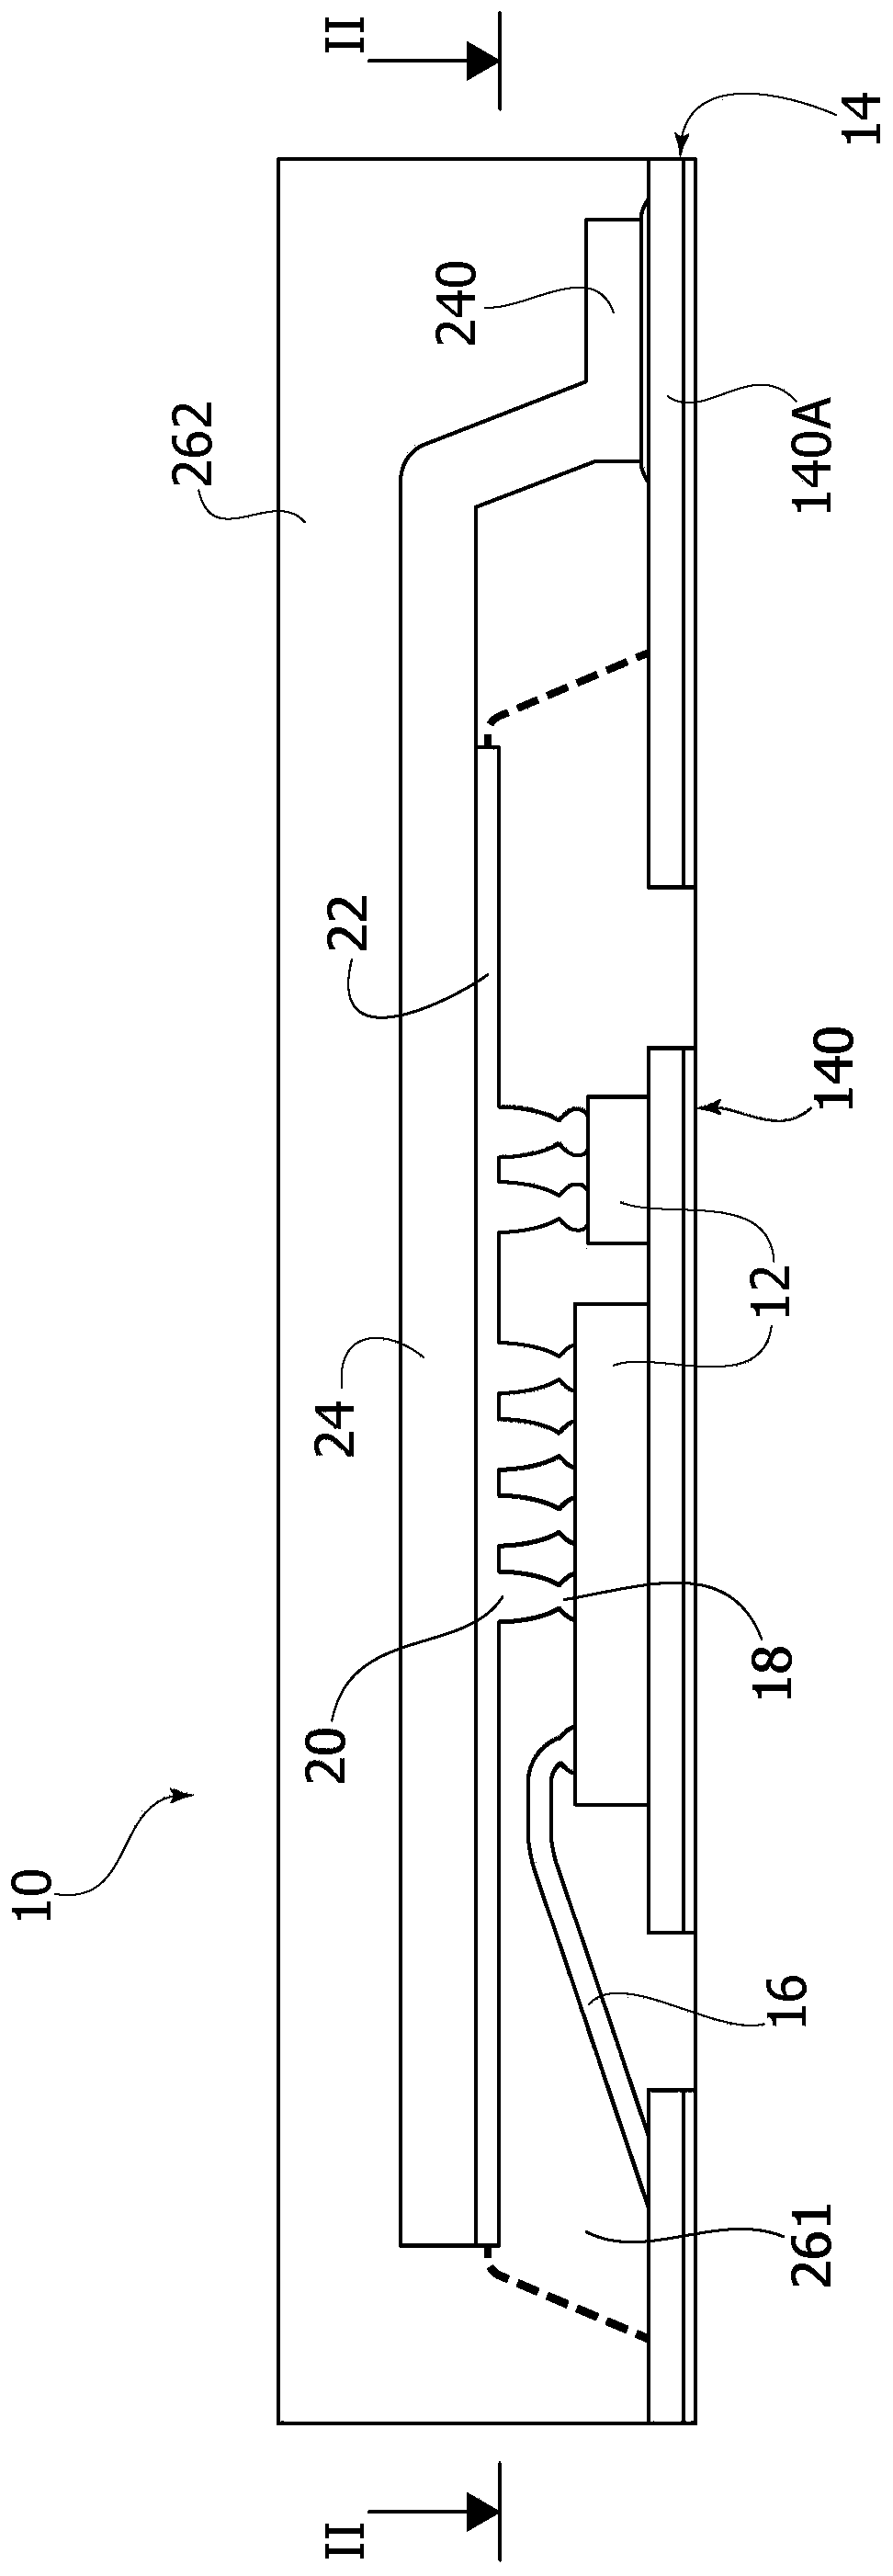 Method of manufacturing semiconductor devices and corresponding semiconductor device